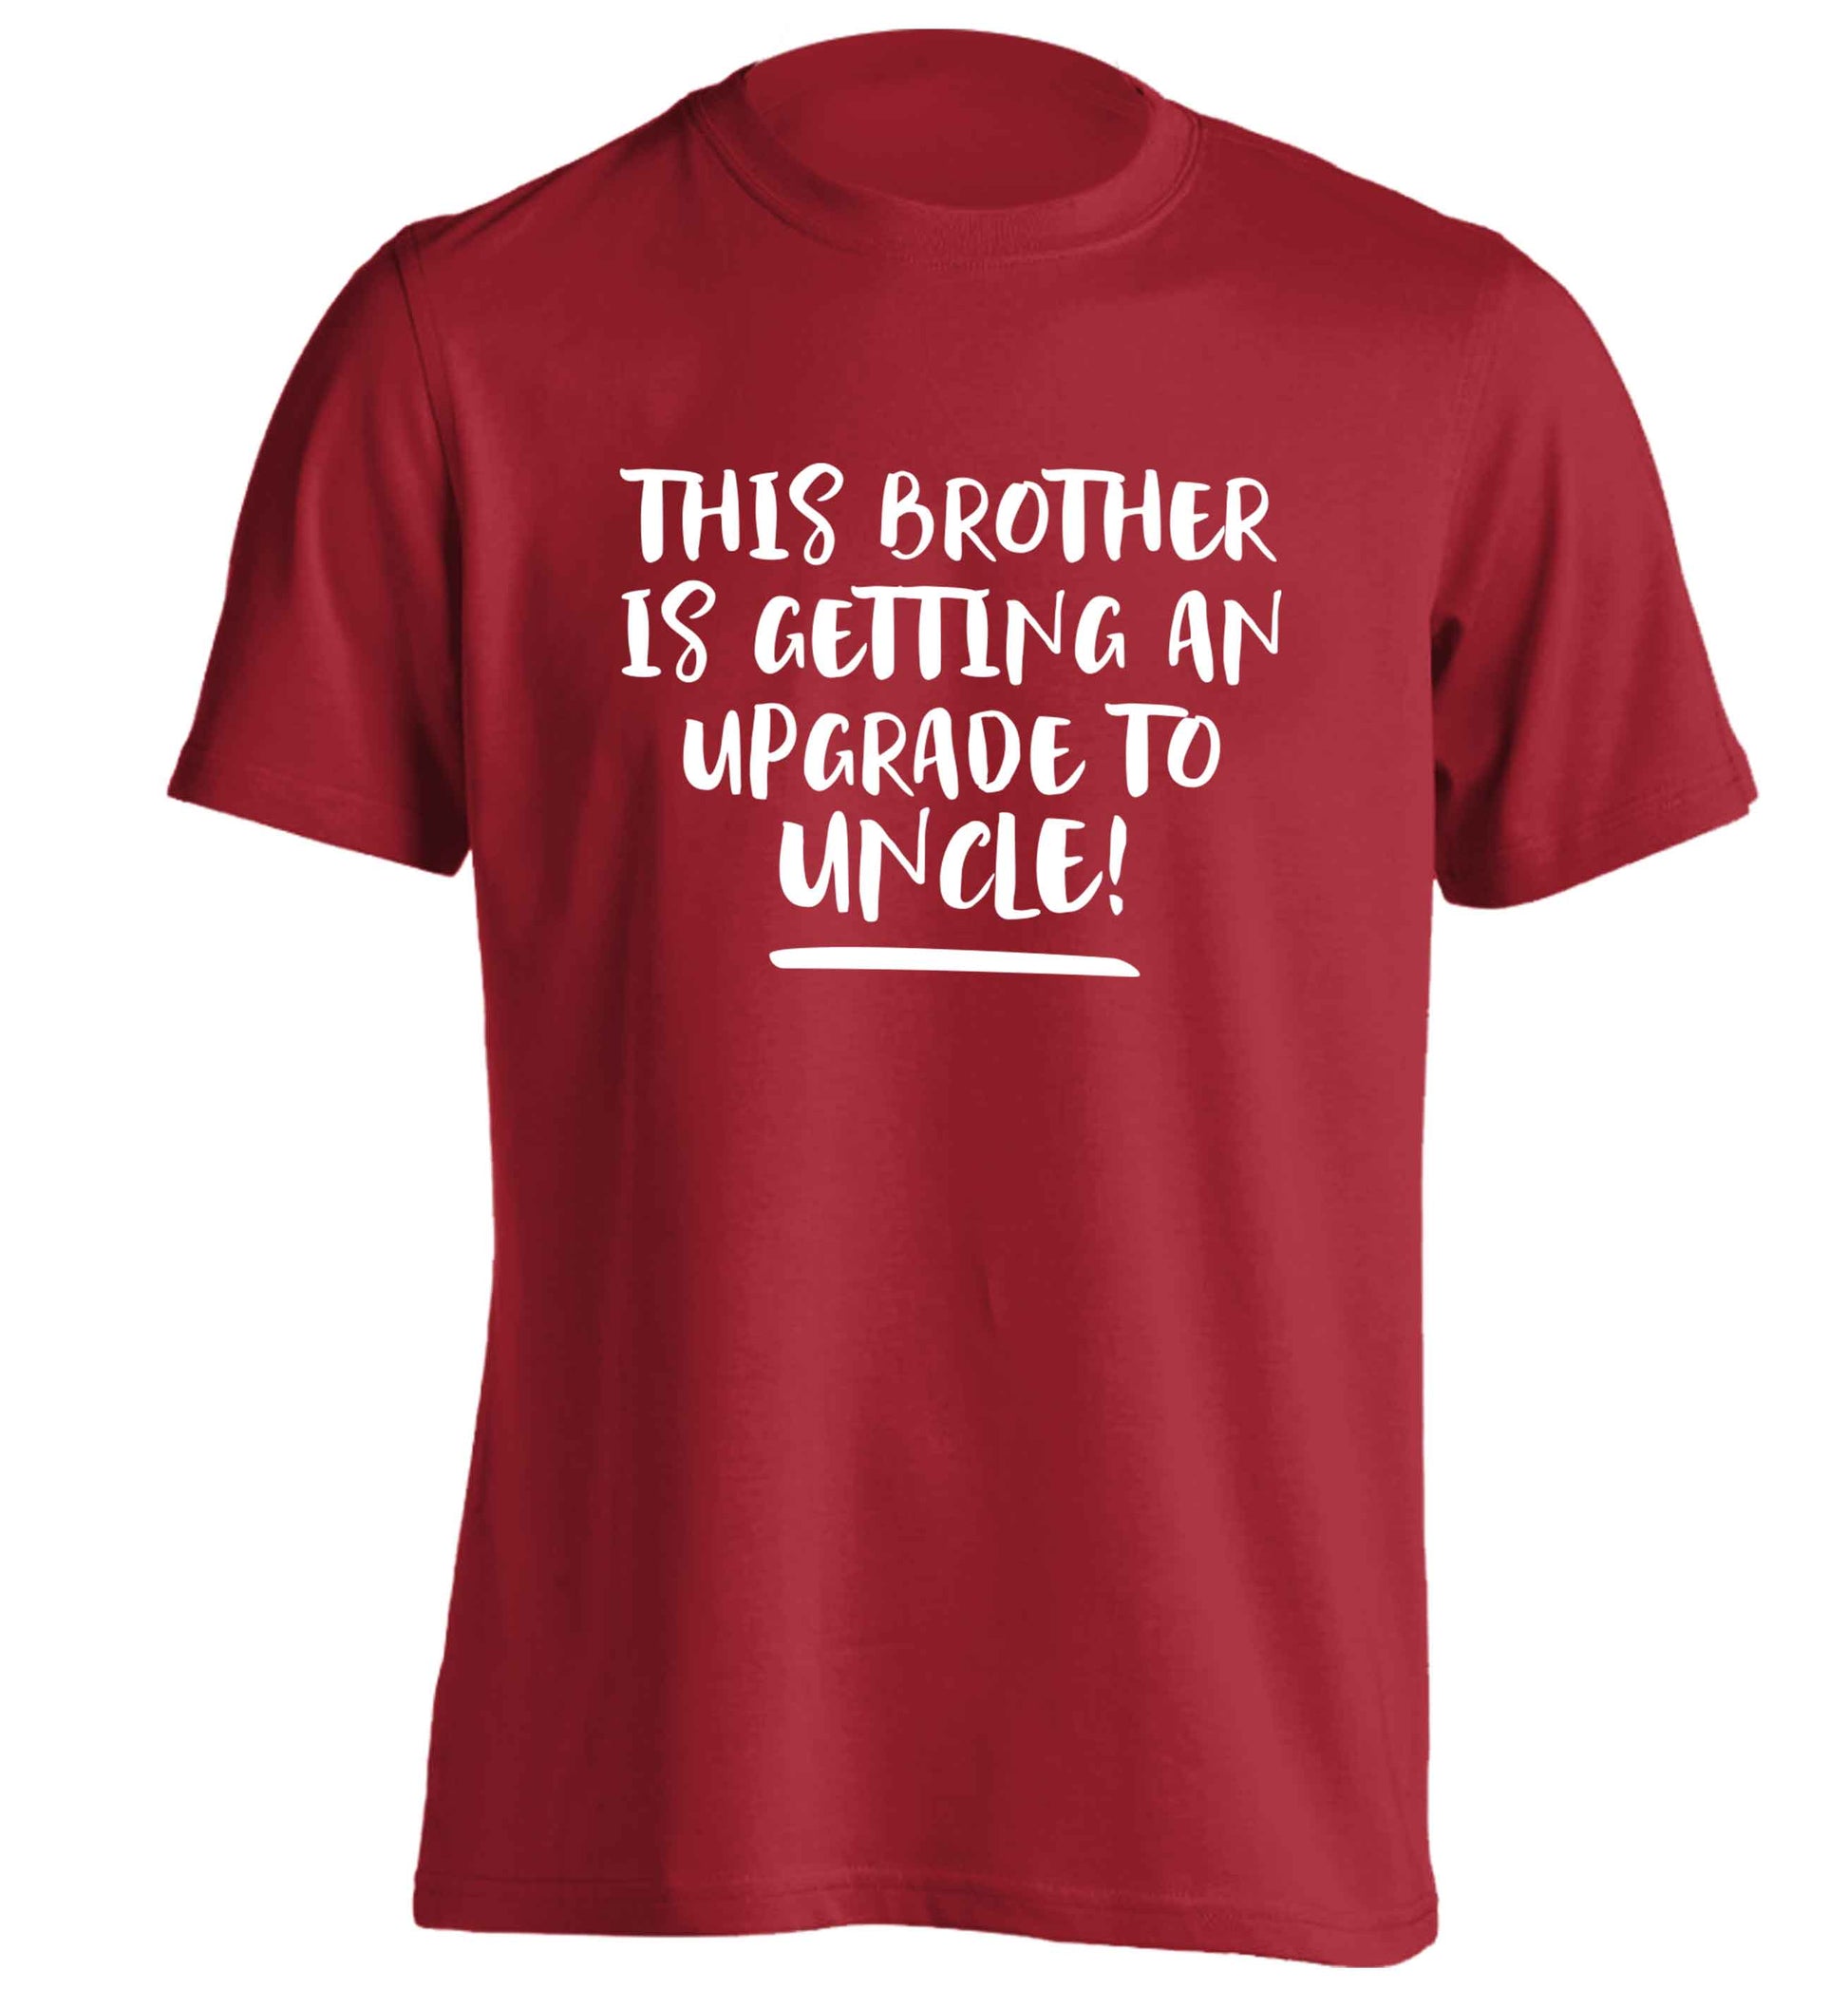 This brother is getting an upgrade to uncle! adults unisex red Tshirt 2XL